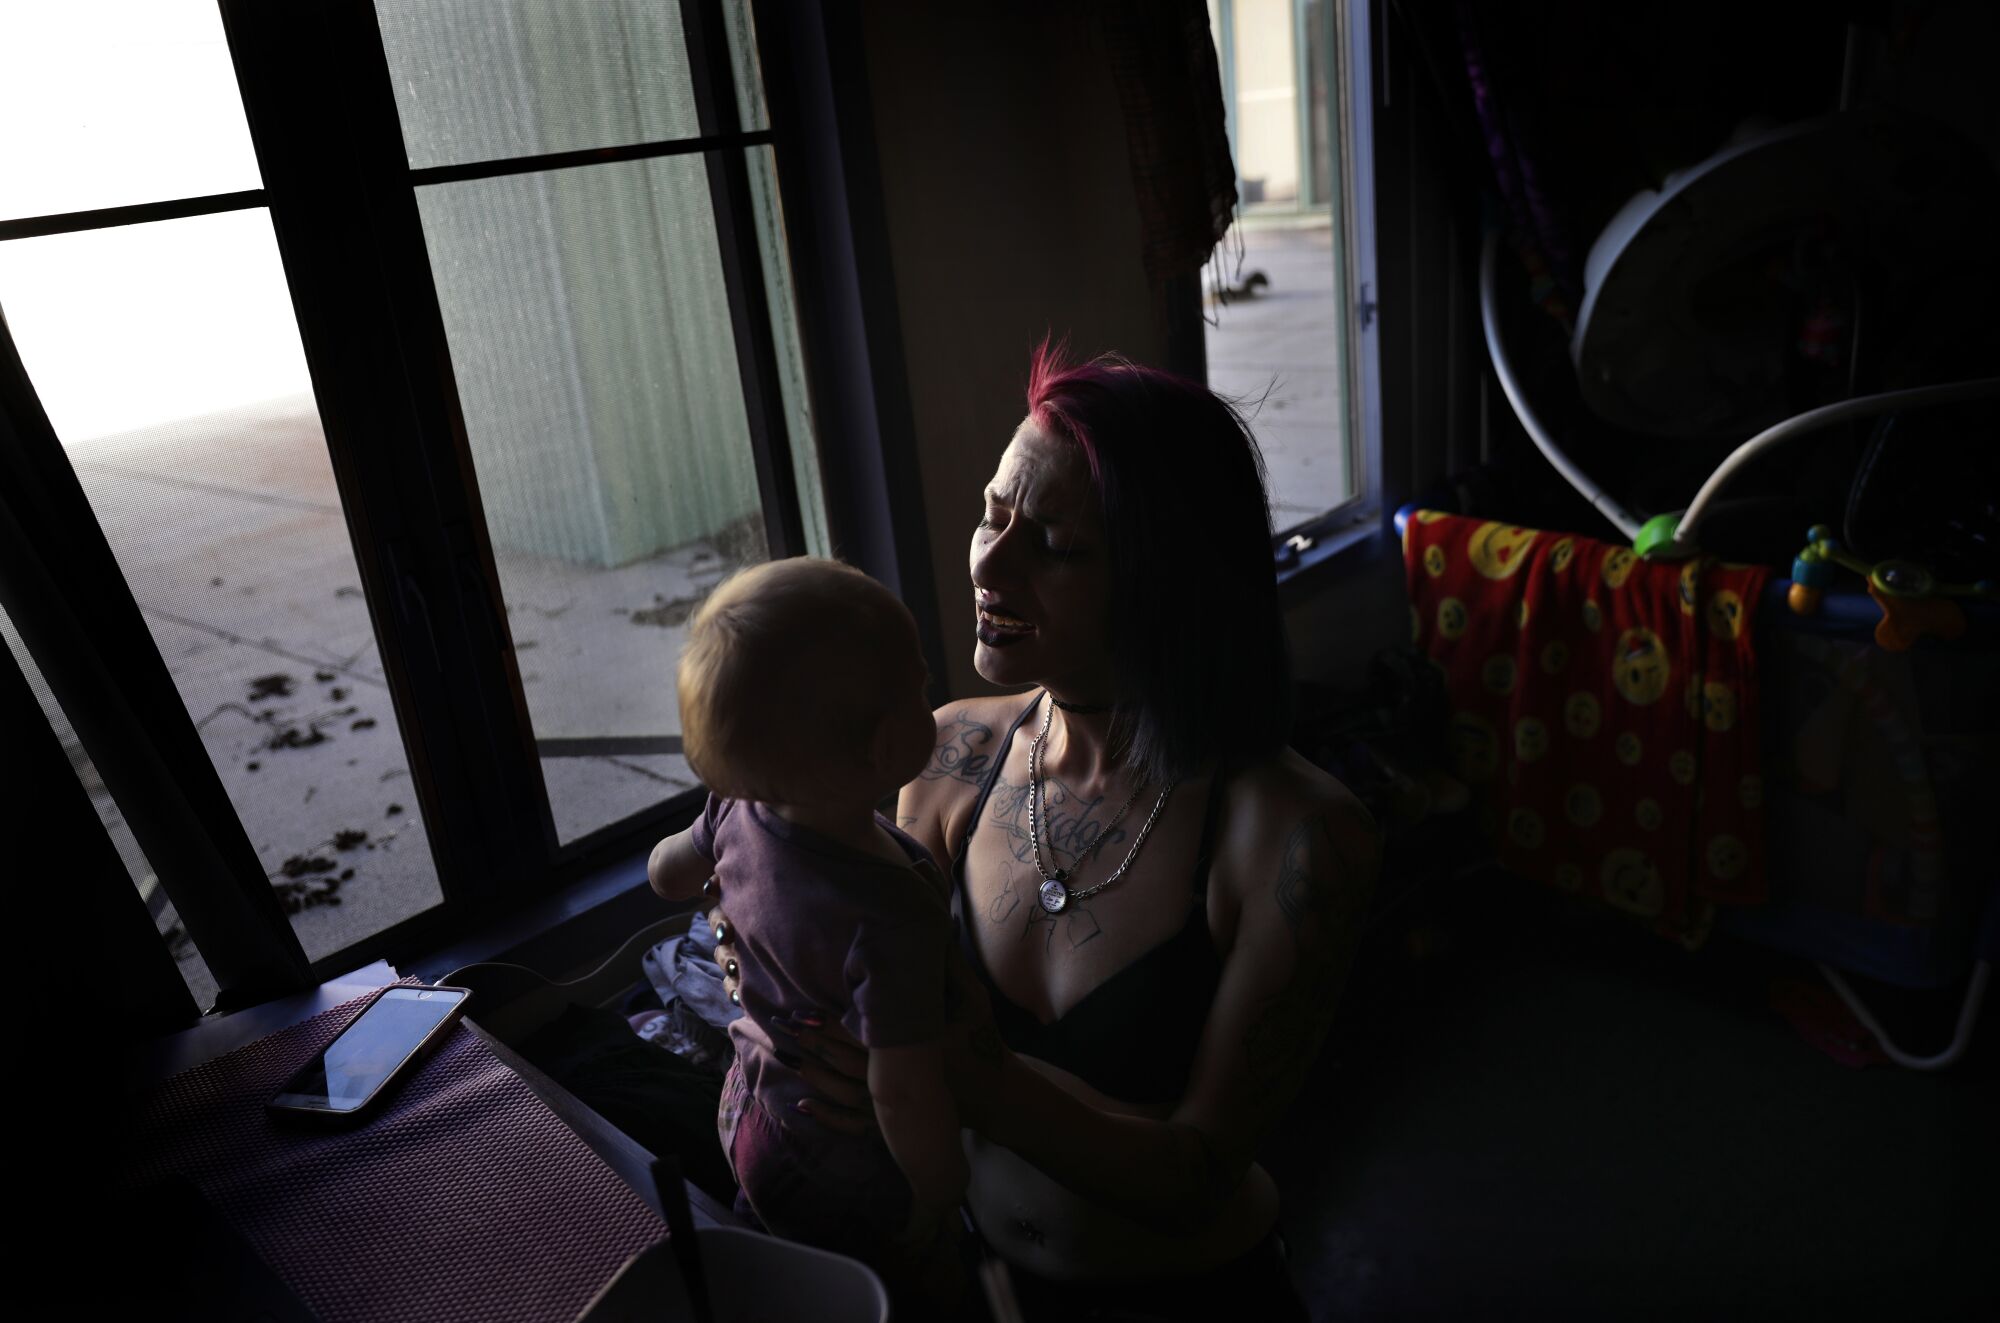 A woman singing to a baby in a darkened room lit by windows behind them.